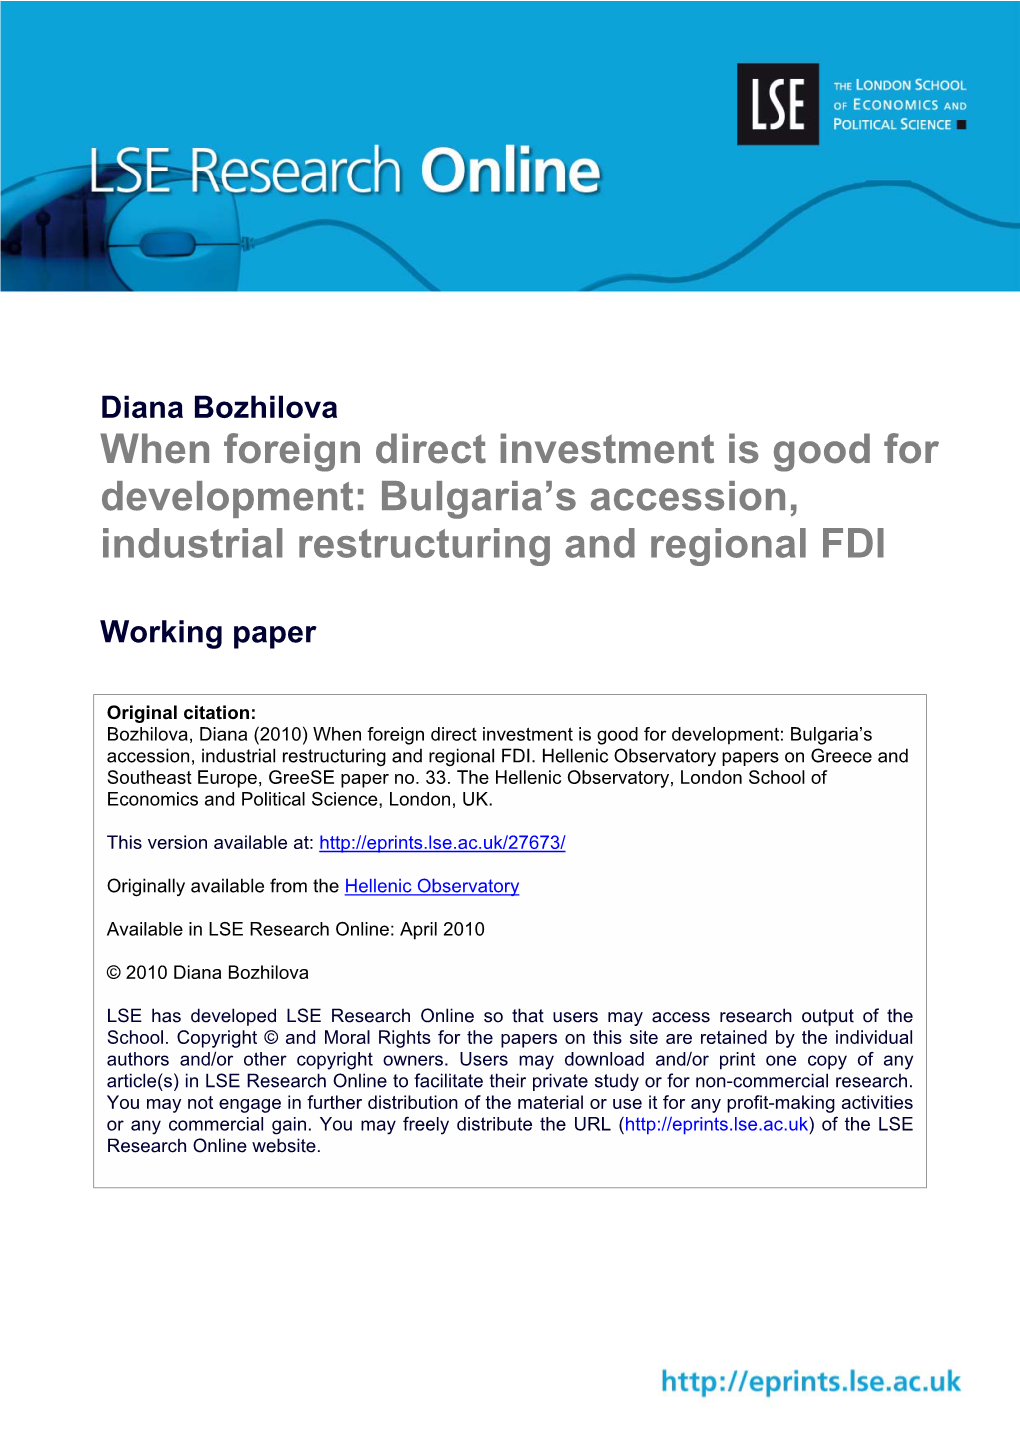 When Foreign Direct Investment Is Good for Development: Bulgaria’S Accession, Industrial Restructuring and Regional FDI